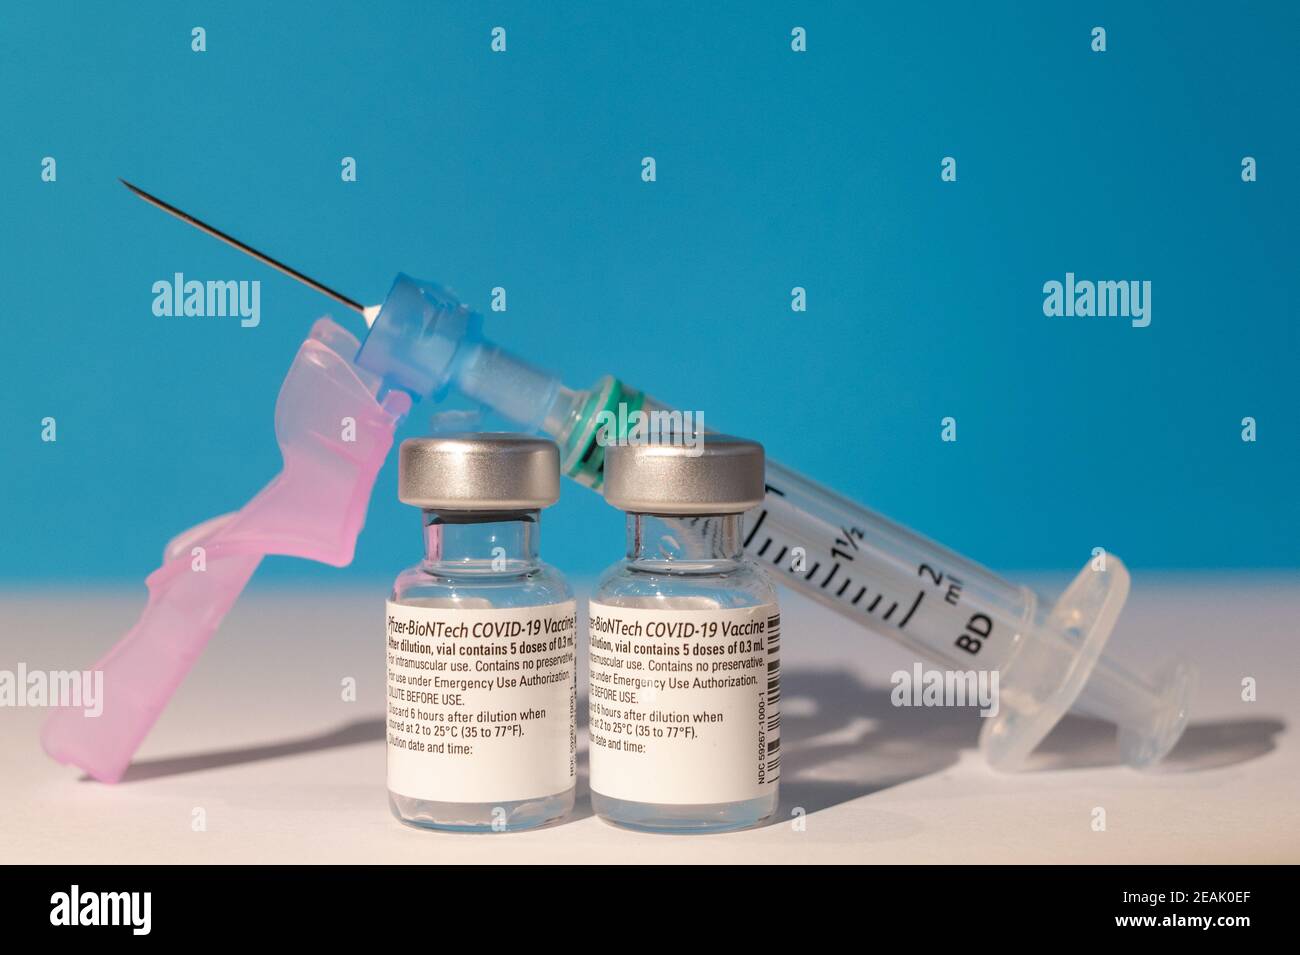 Two vials of Pfizer - BioNTech COVID-19 vaccine for coronavirus treatment and a syringe Stock Photo